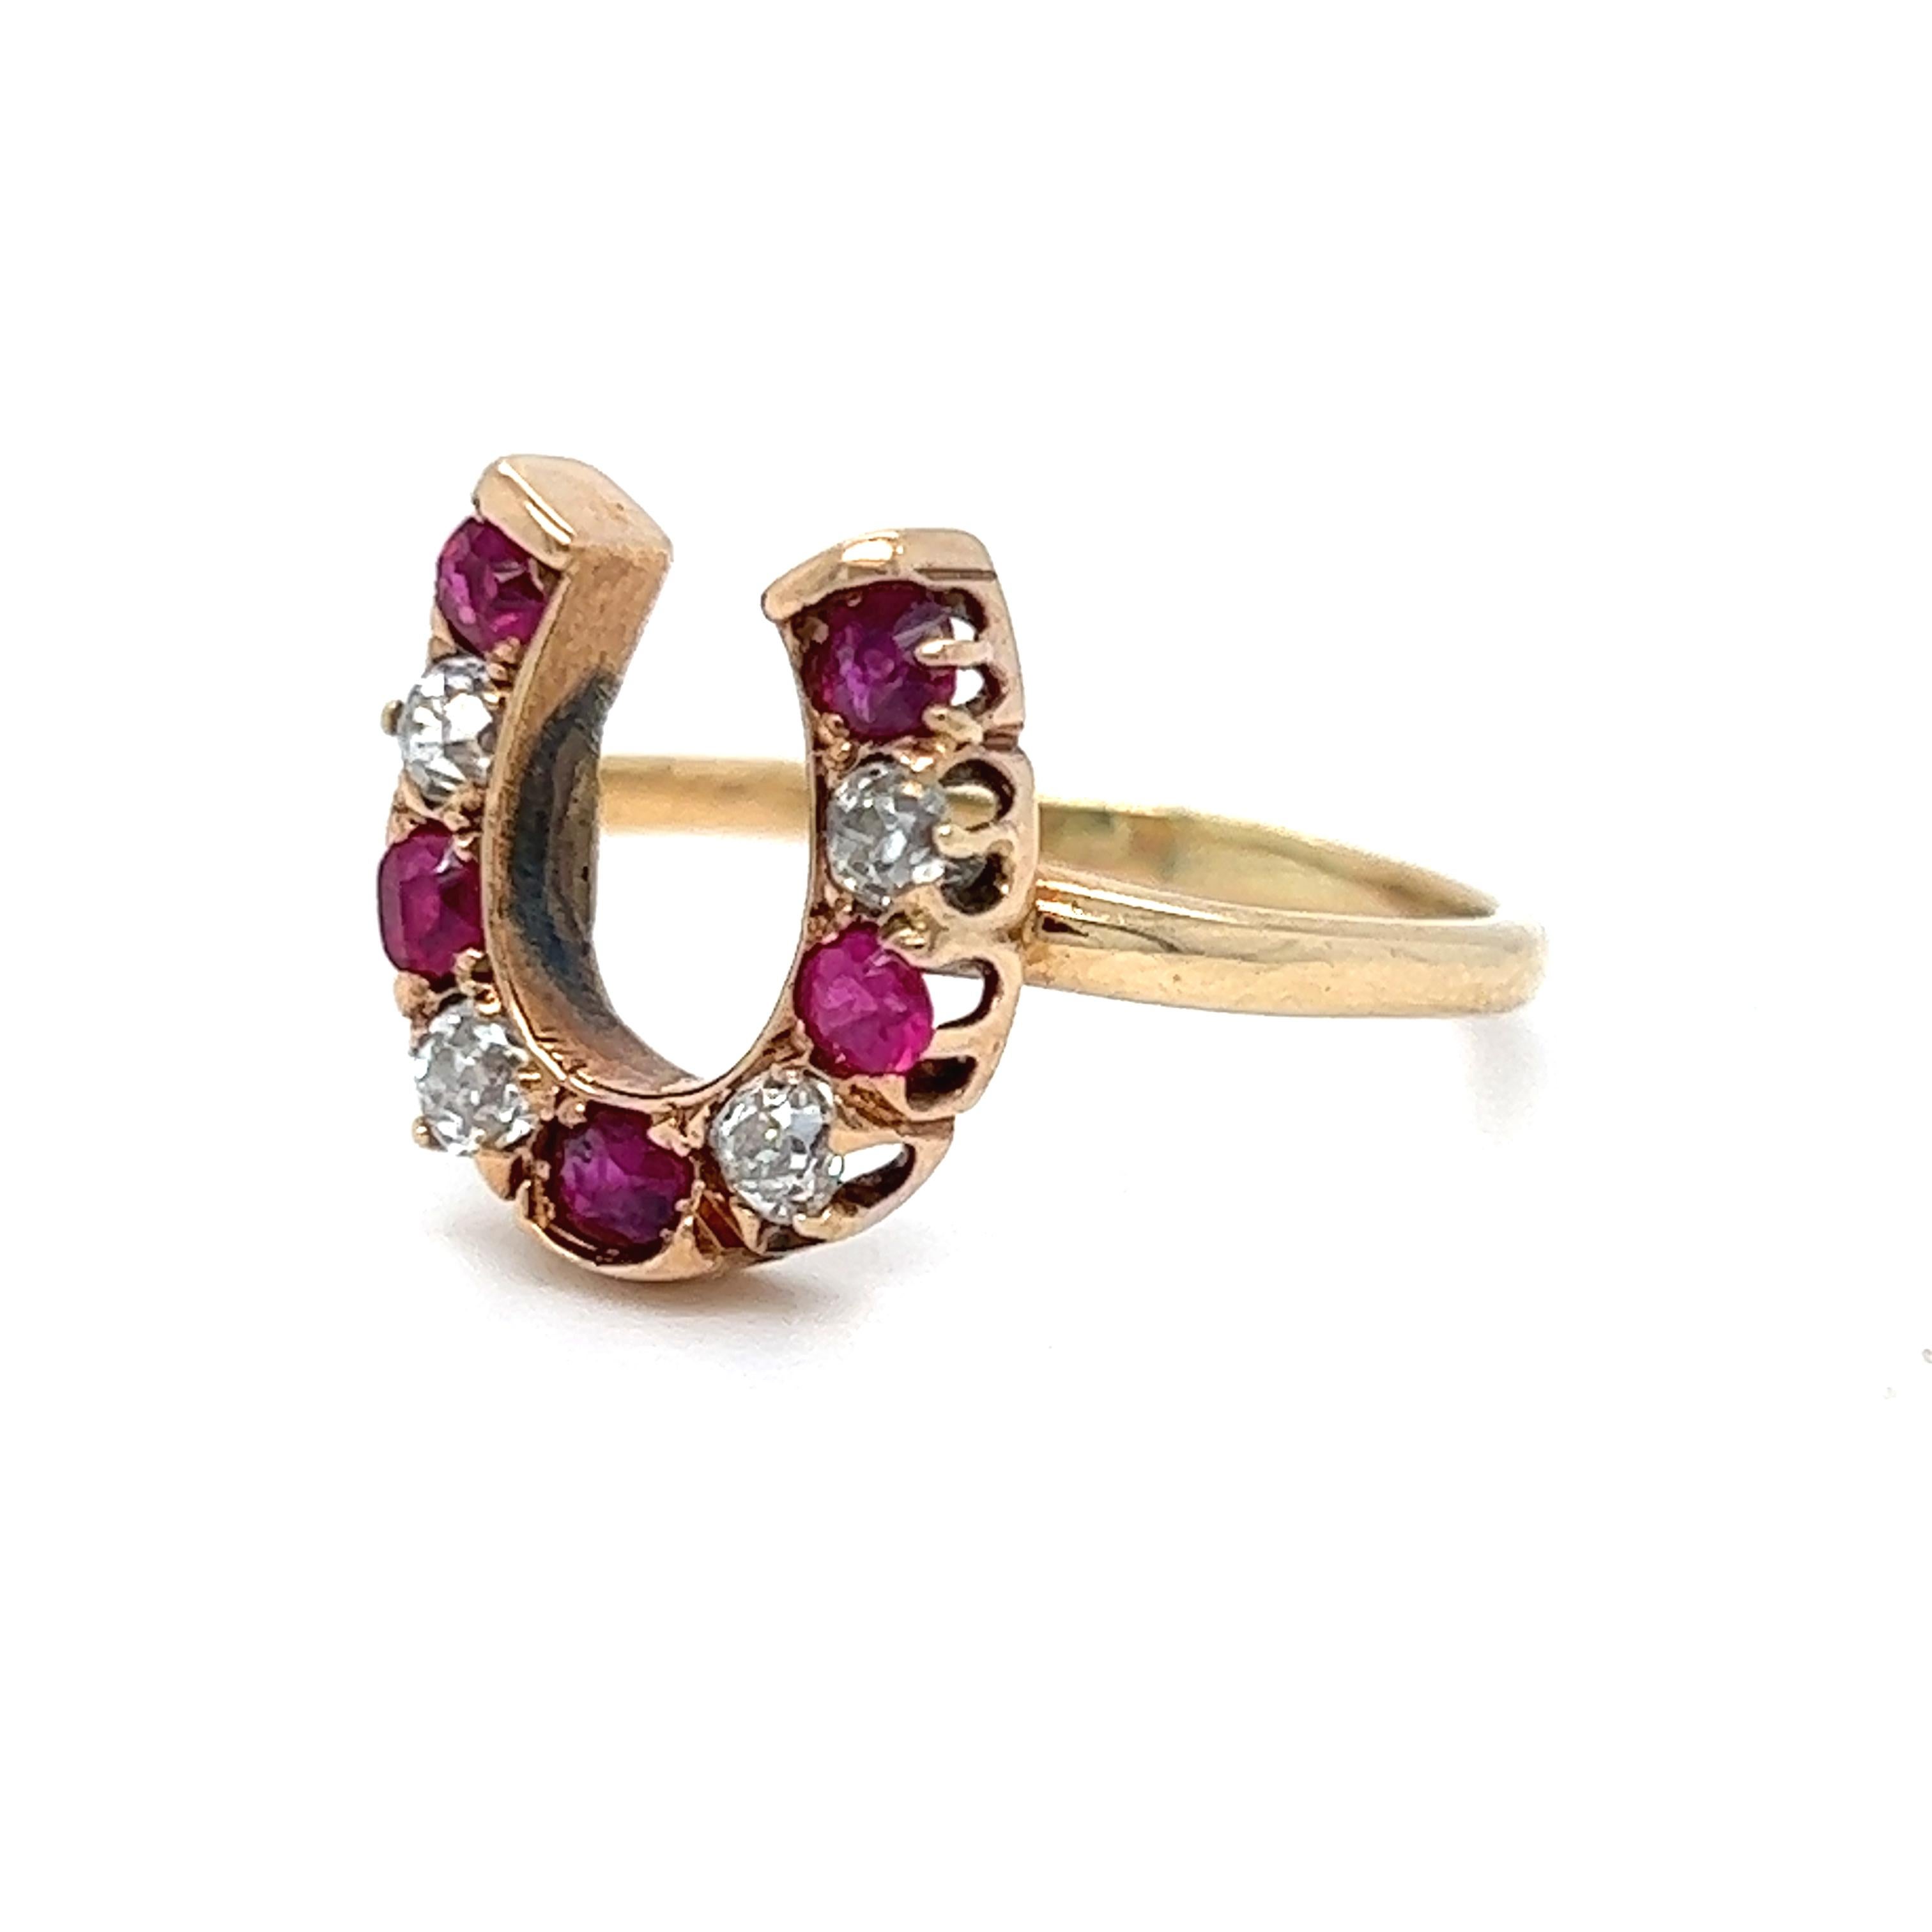 Late Victorian Lucky Vintage Horseshoe Ring in Diamonds, Rubies, and 14K Yellow Gold. For Sale